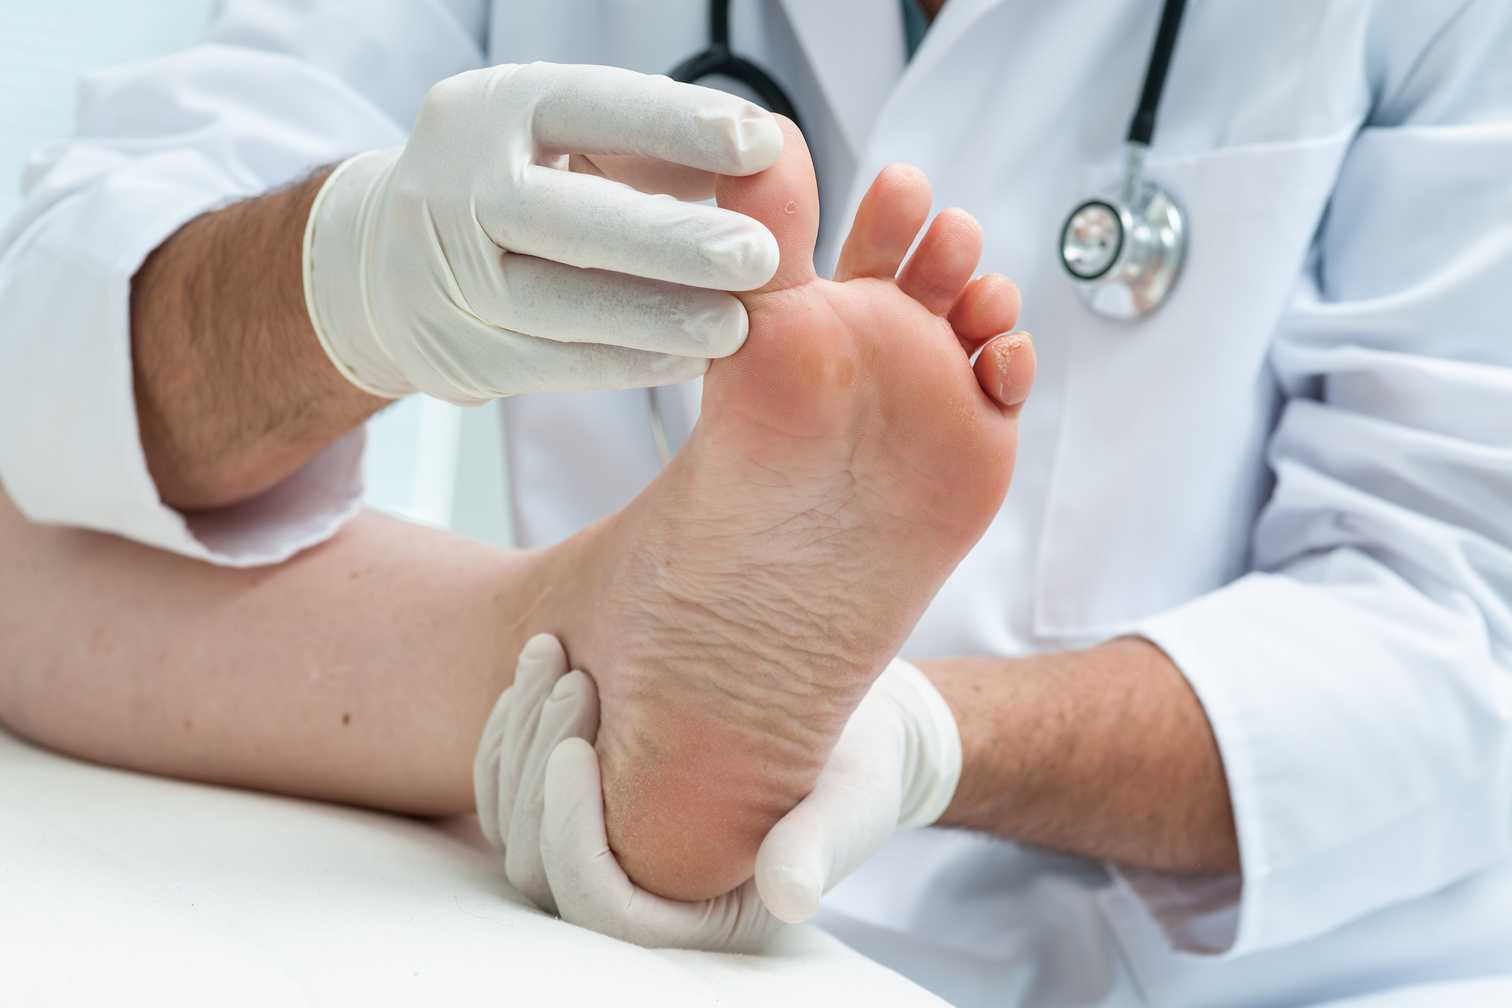 Podiatrist examines the foot of a patient